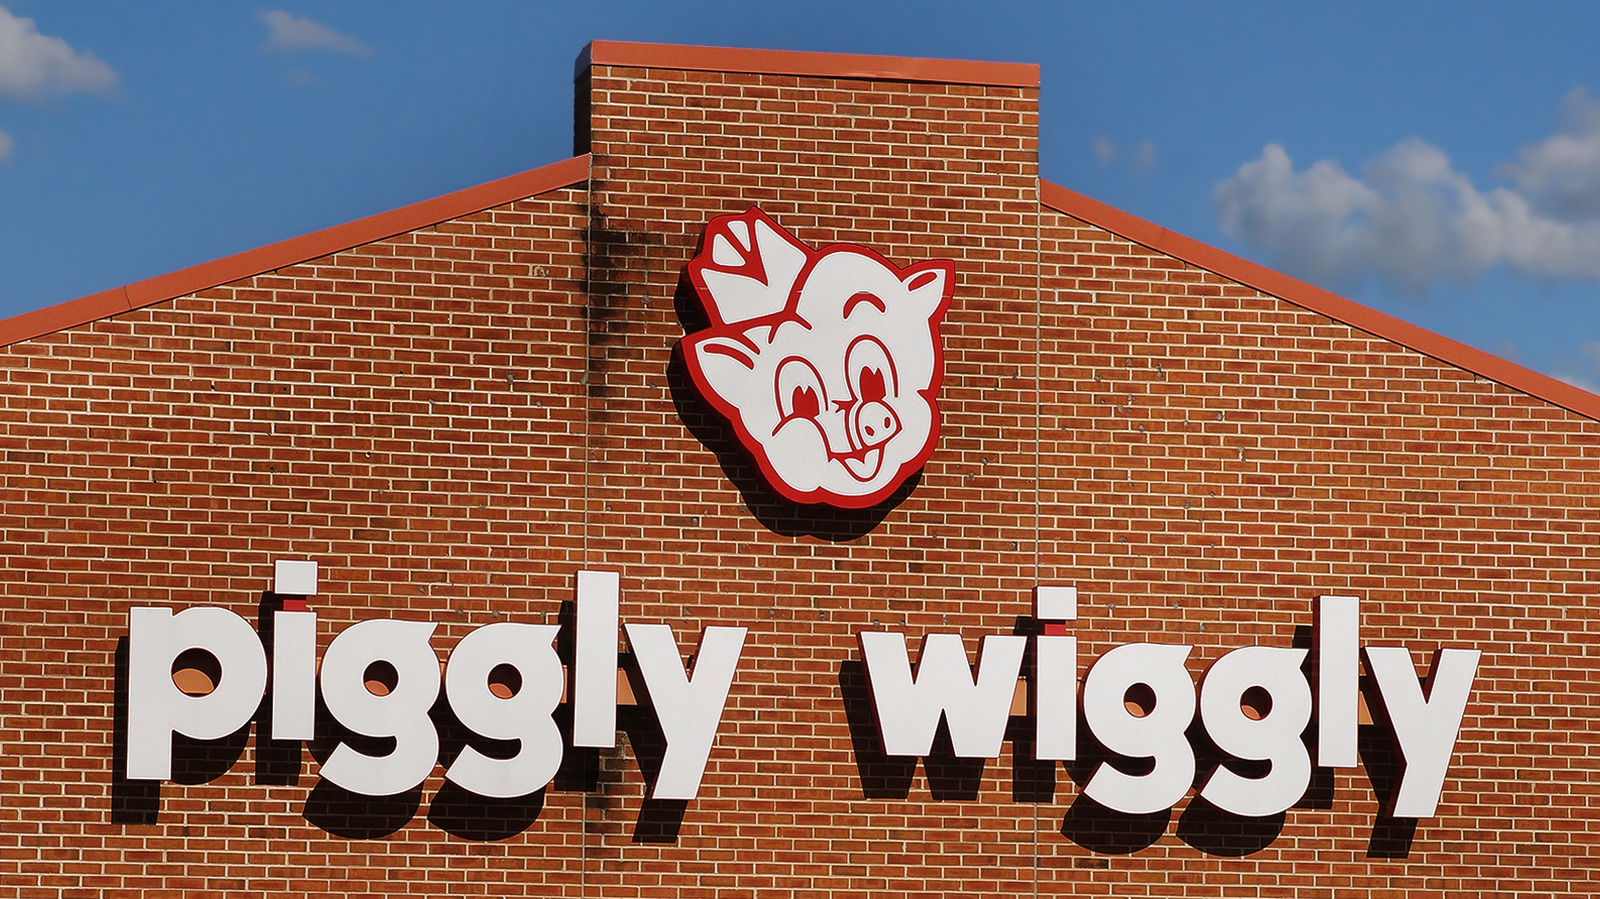 How Piggly Wiggly Became the First Modern Grocery Store